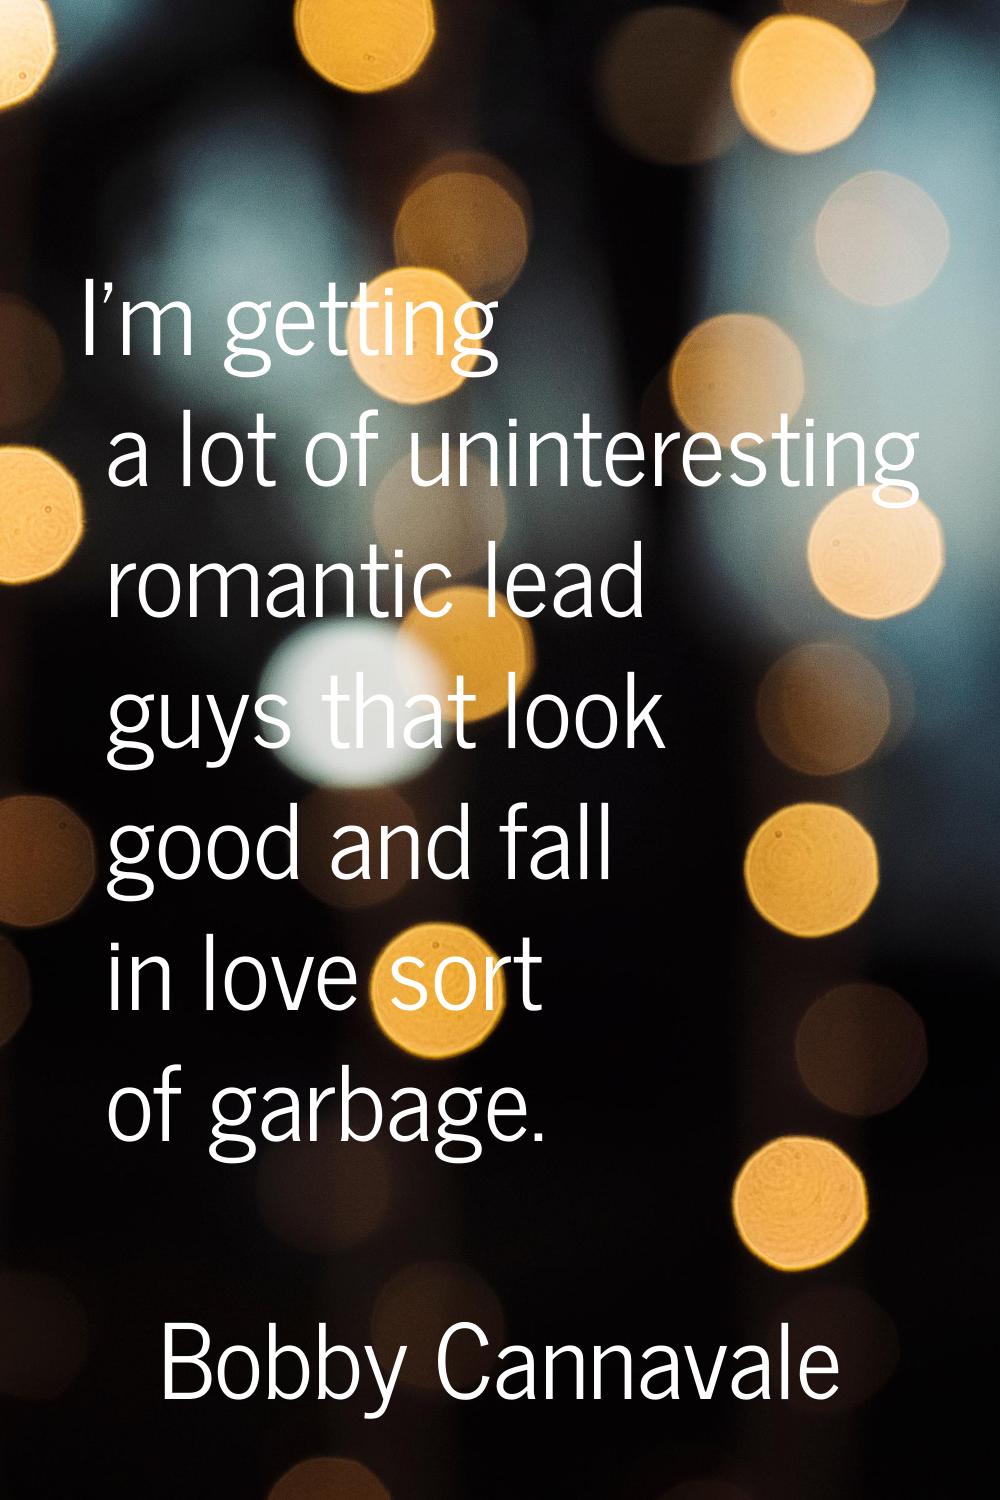 I'm getting a lot of uninteresting romantic lead guys that look good and fall in love sort of garba